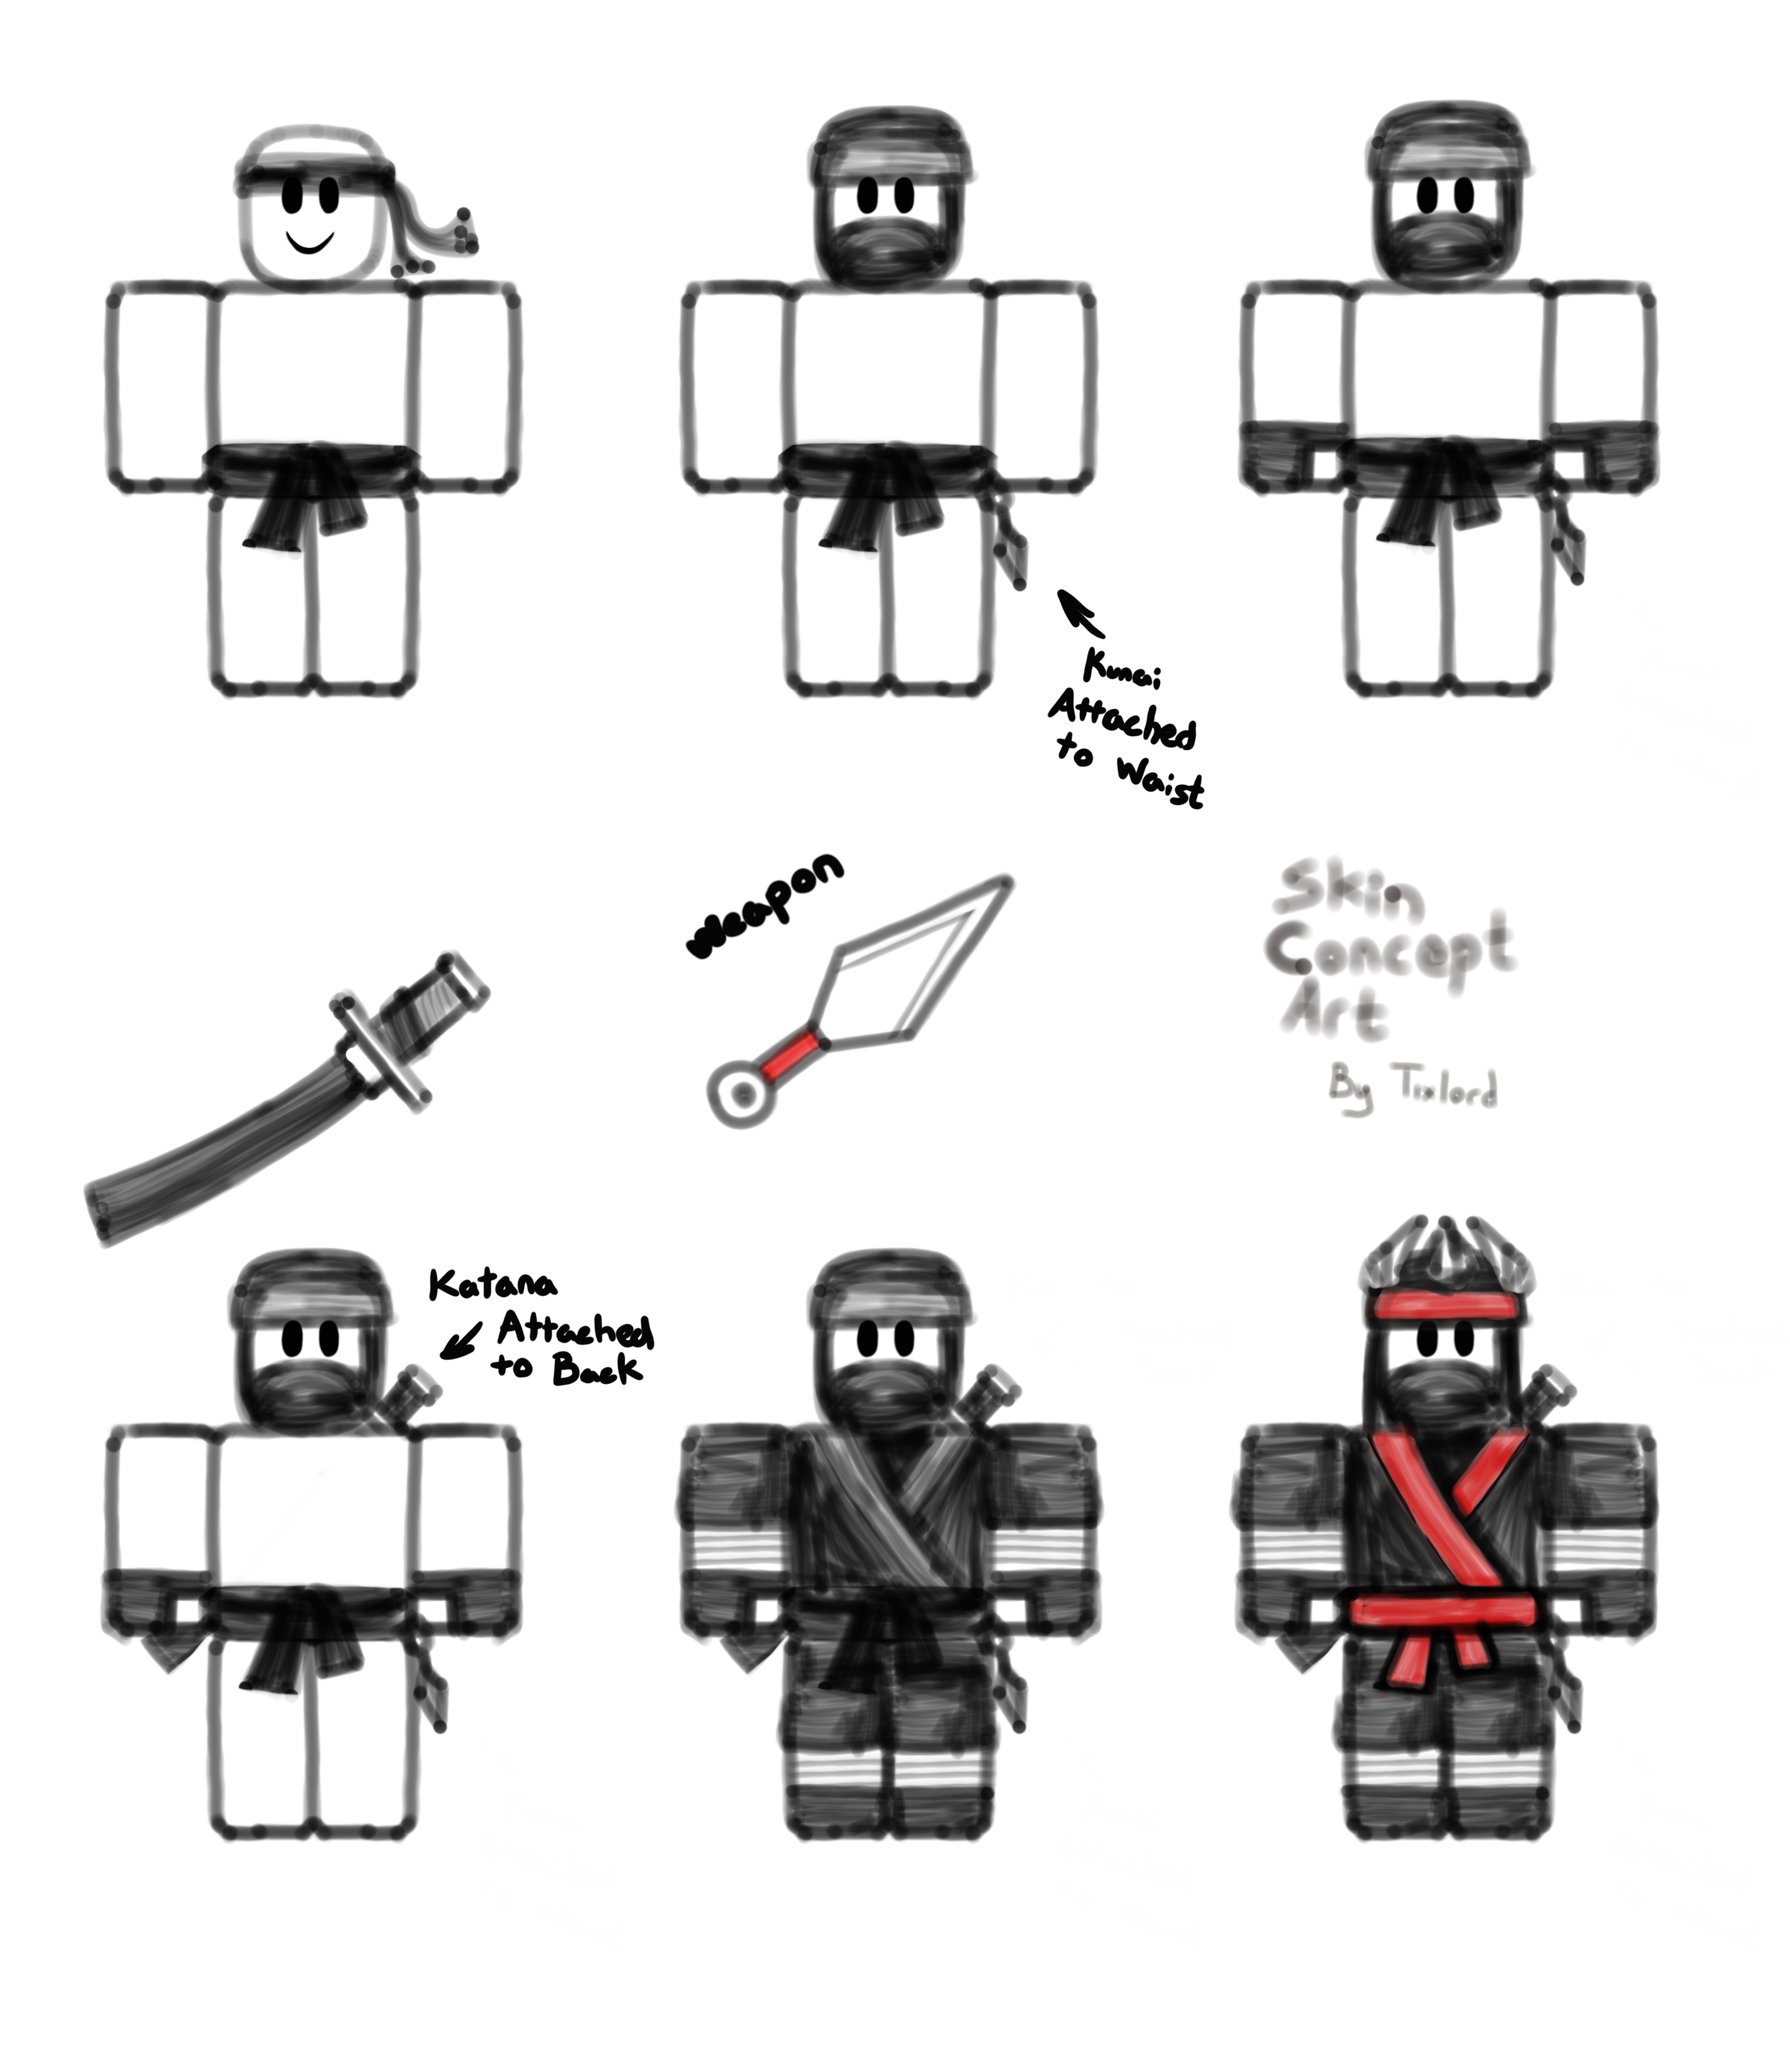 Tixlord On Twitter Another Skin Idea I Made For Tower Defense Simulator It Is A Concept Art This Time Cuz I Have No Idea About Modeling Lol It Is A Holiday Archer - roblox archer simulator